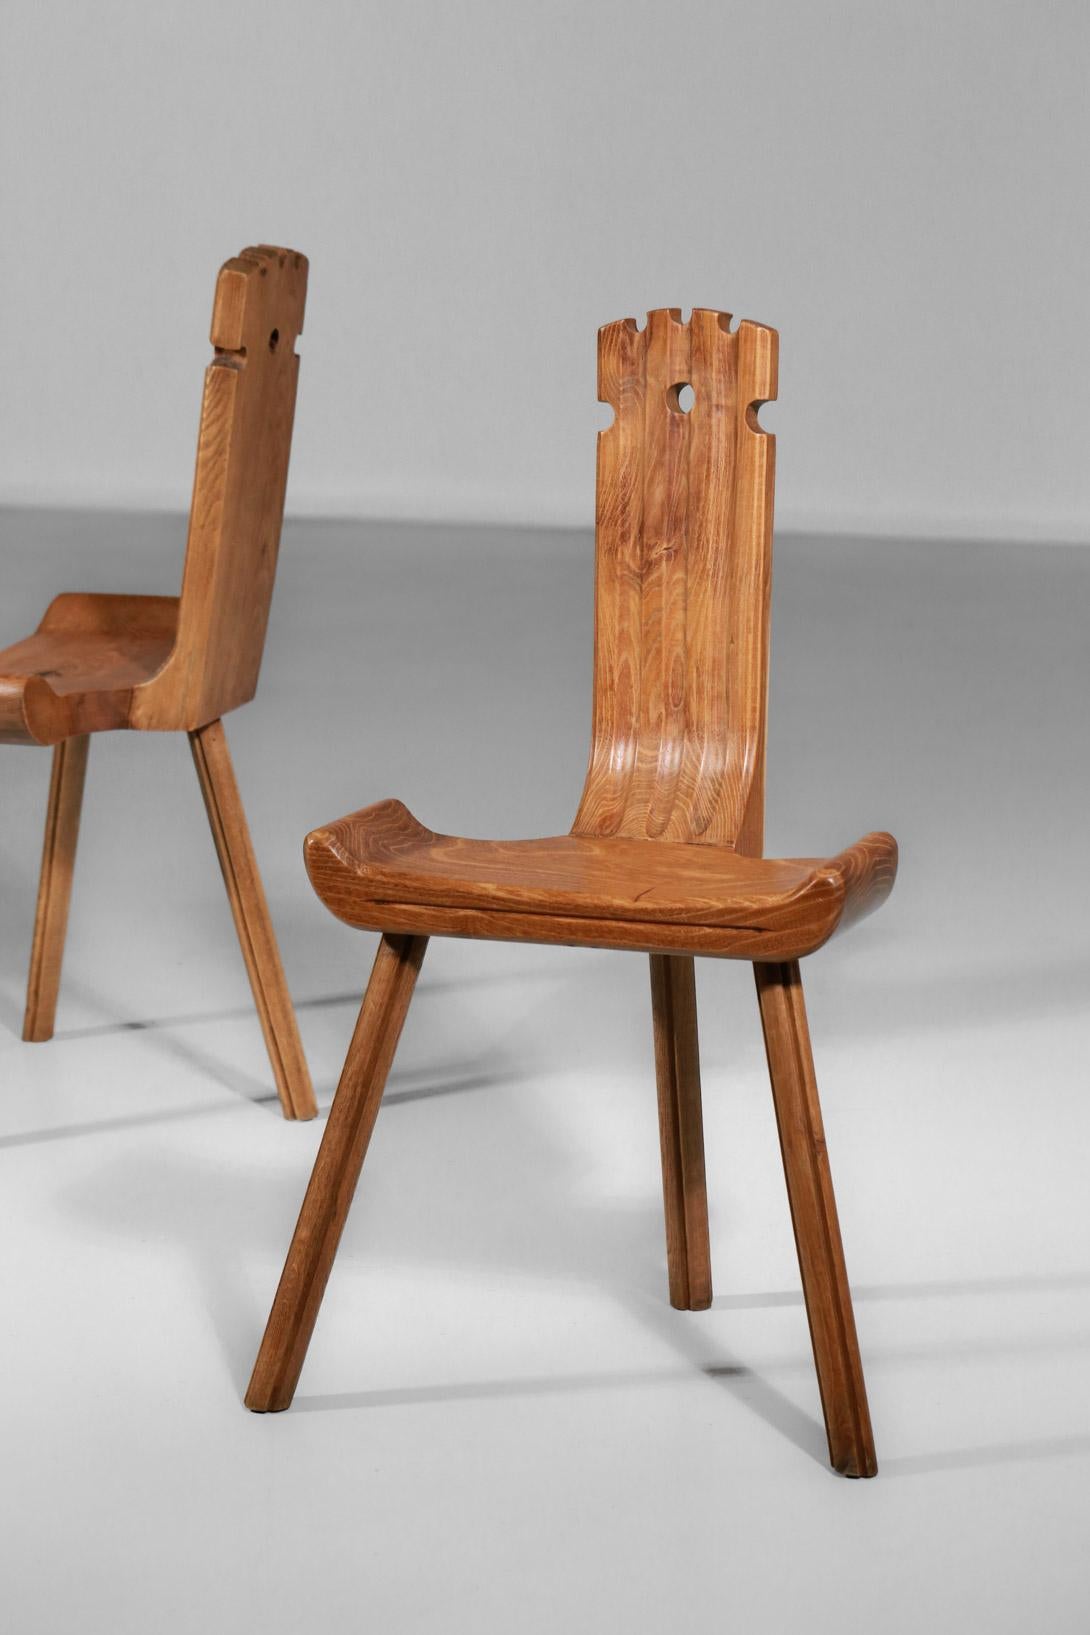 Mid-20th Century French Tripod Chairs from the 1960s Oak Rustic Style of Charlotte Perriand, Pair